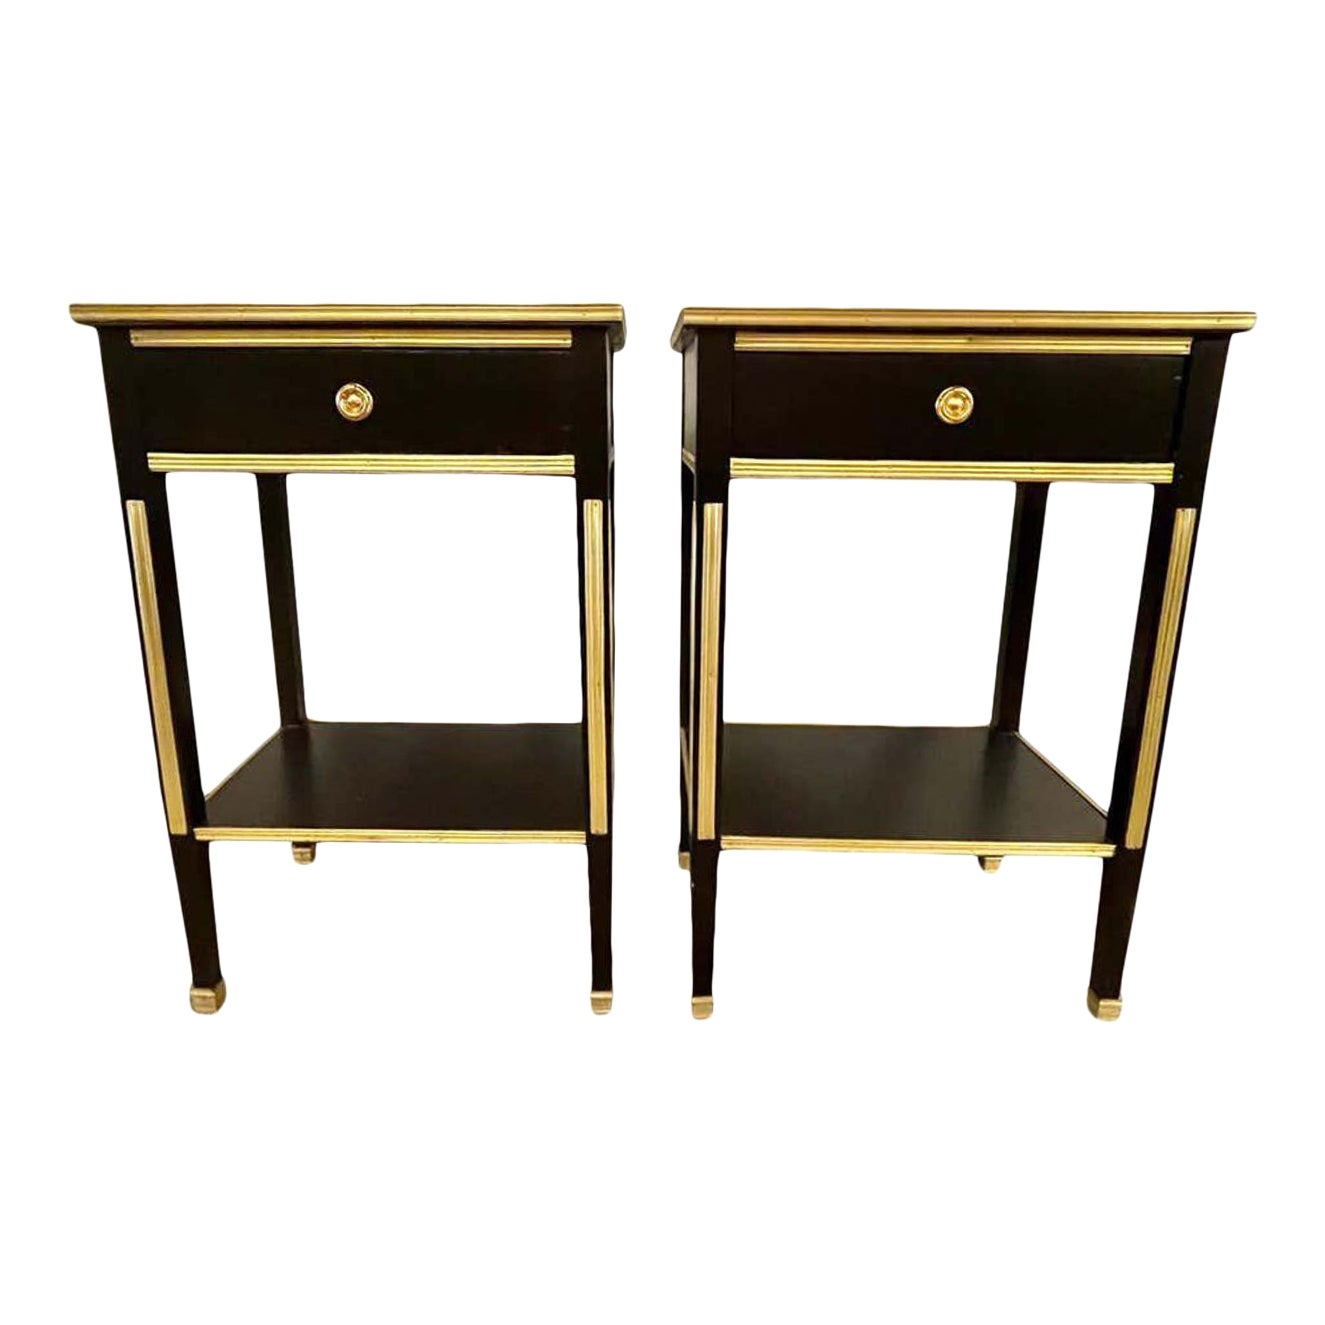 Russian Neoclassical Style Ebony Finish One Drawer Stands or End Tables, a Pair For Sale